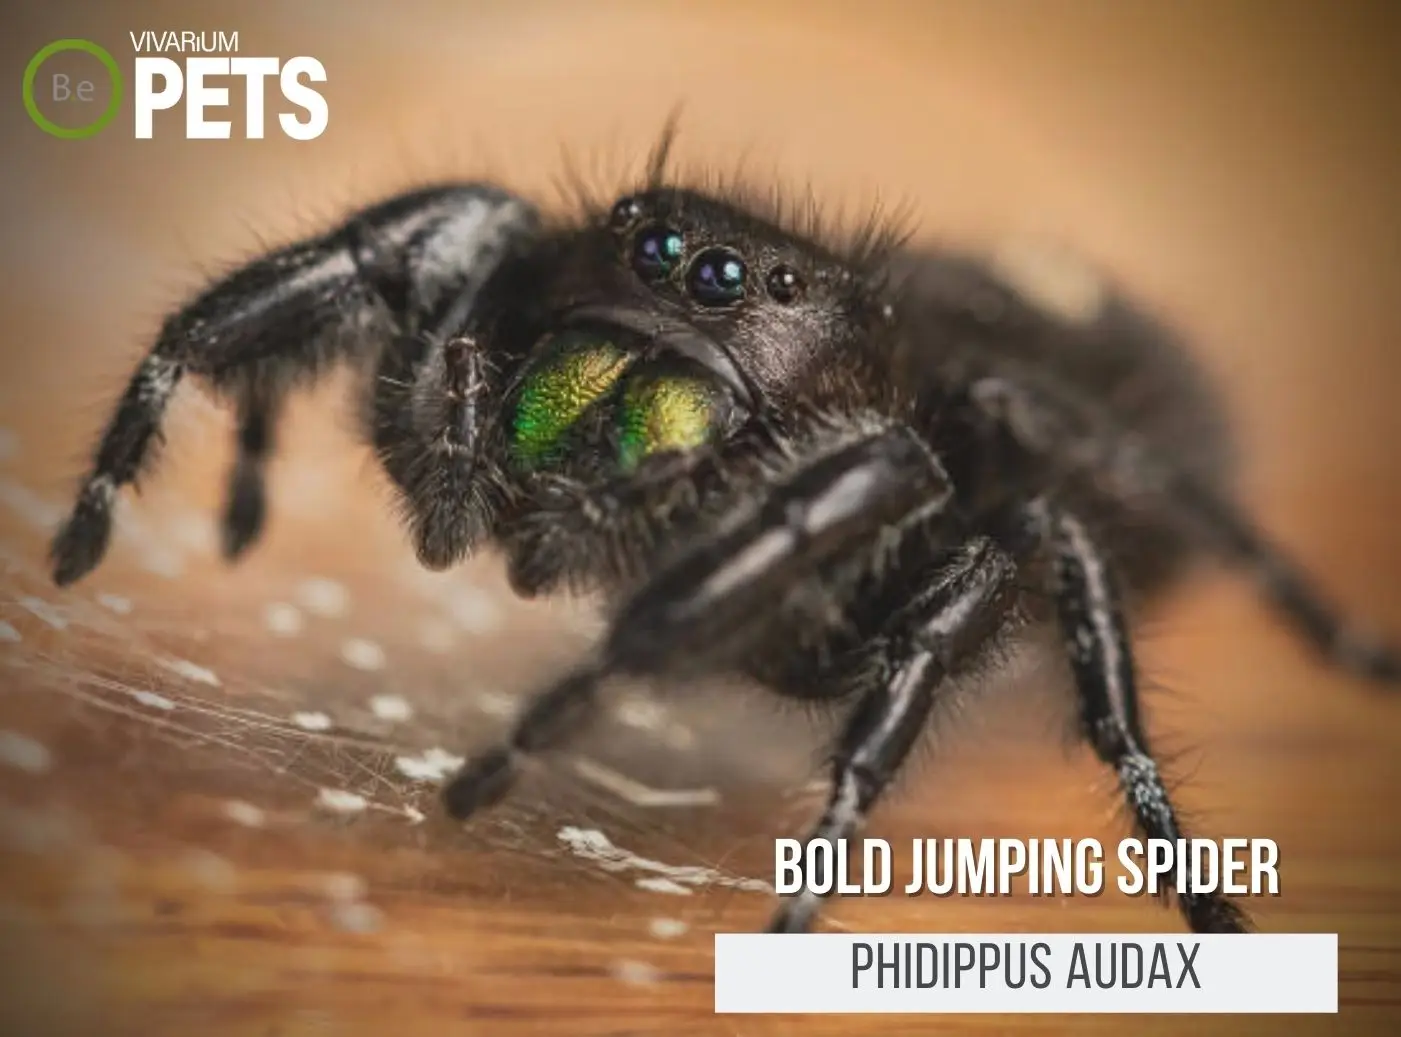 Jumping spider, Miniature, Colorful, Agile